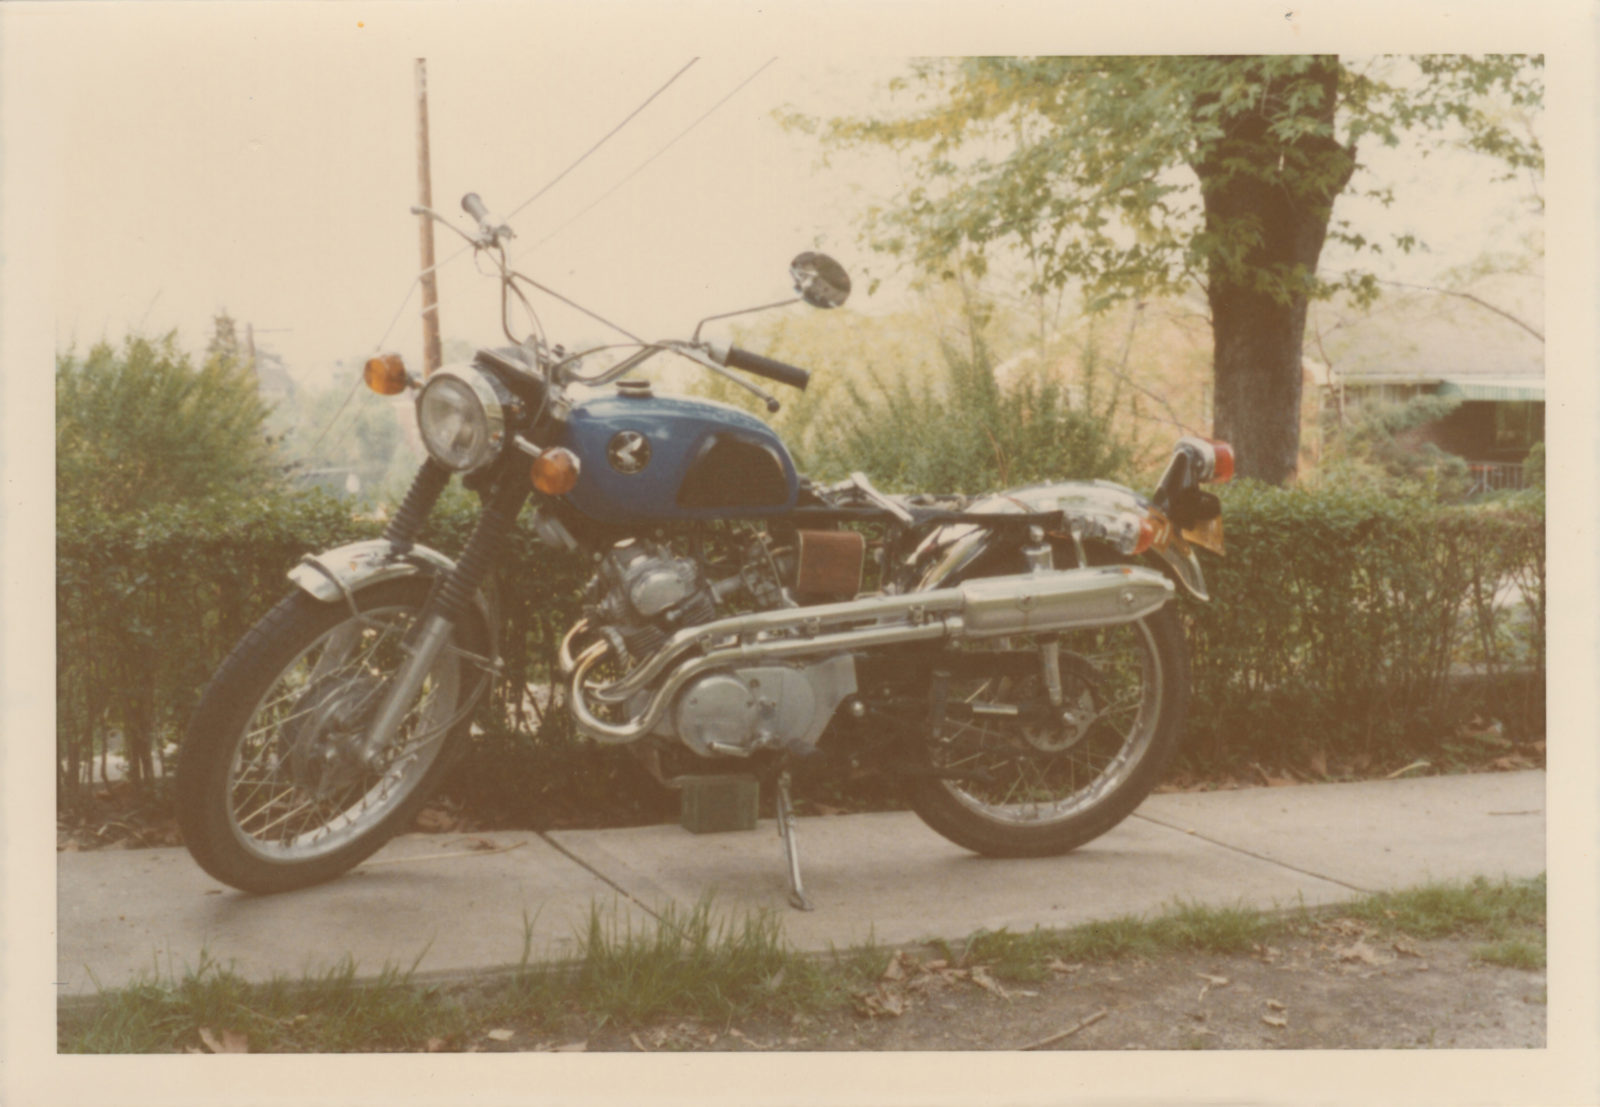 Bill's first motorcycle